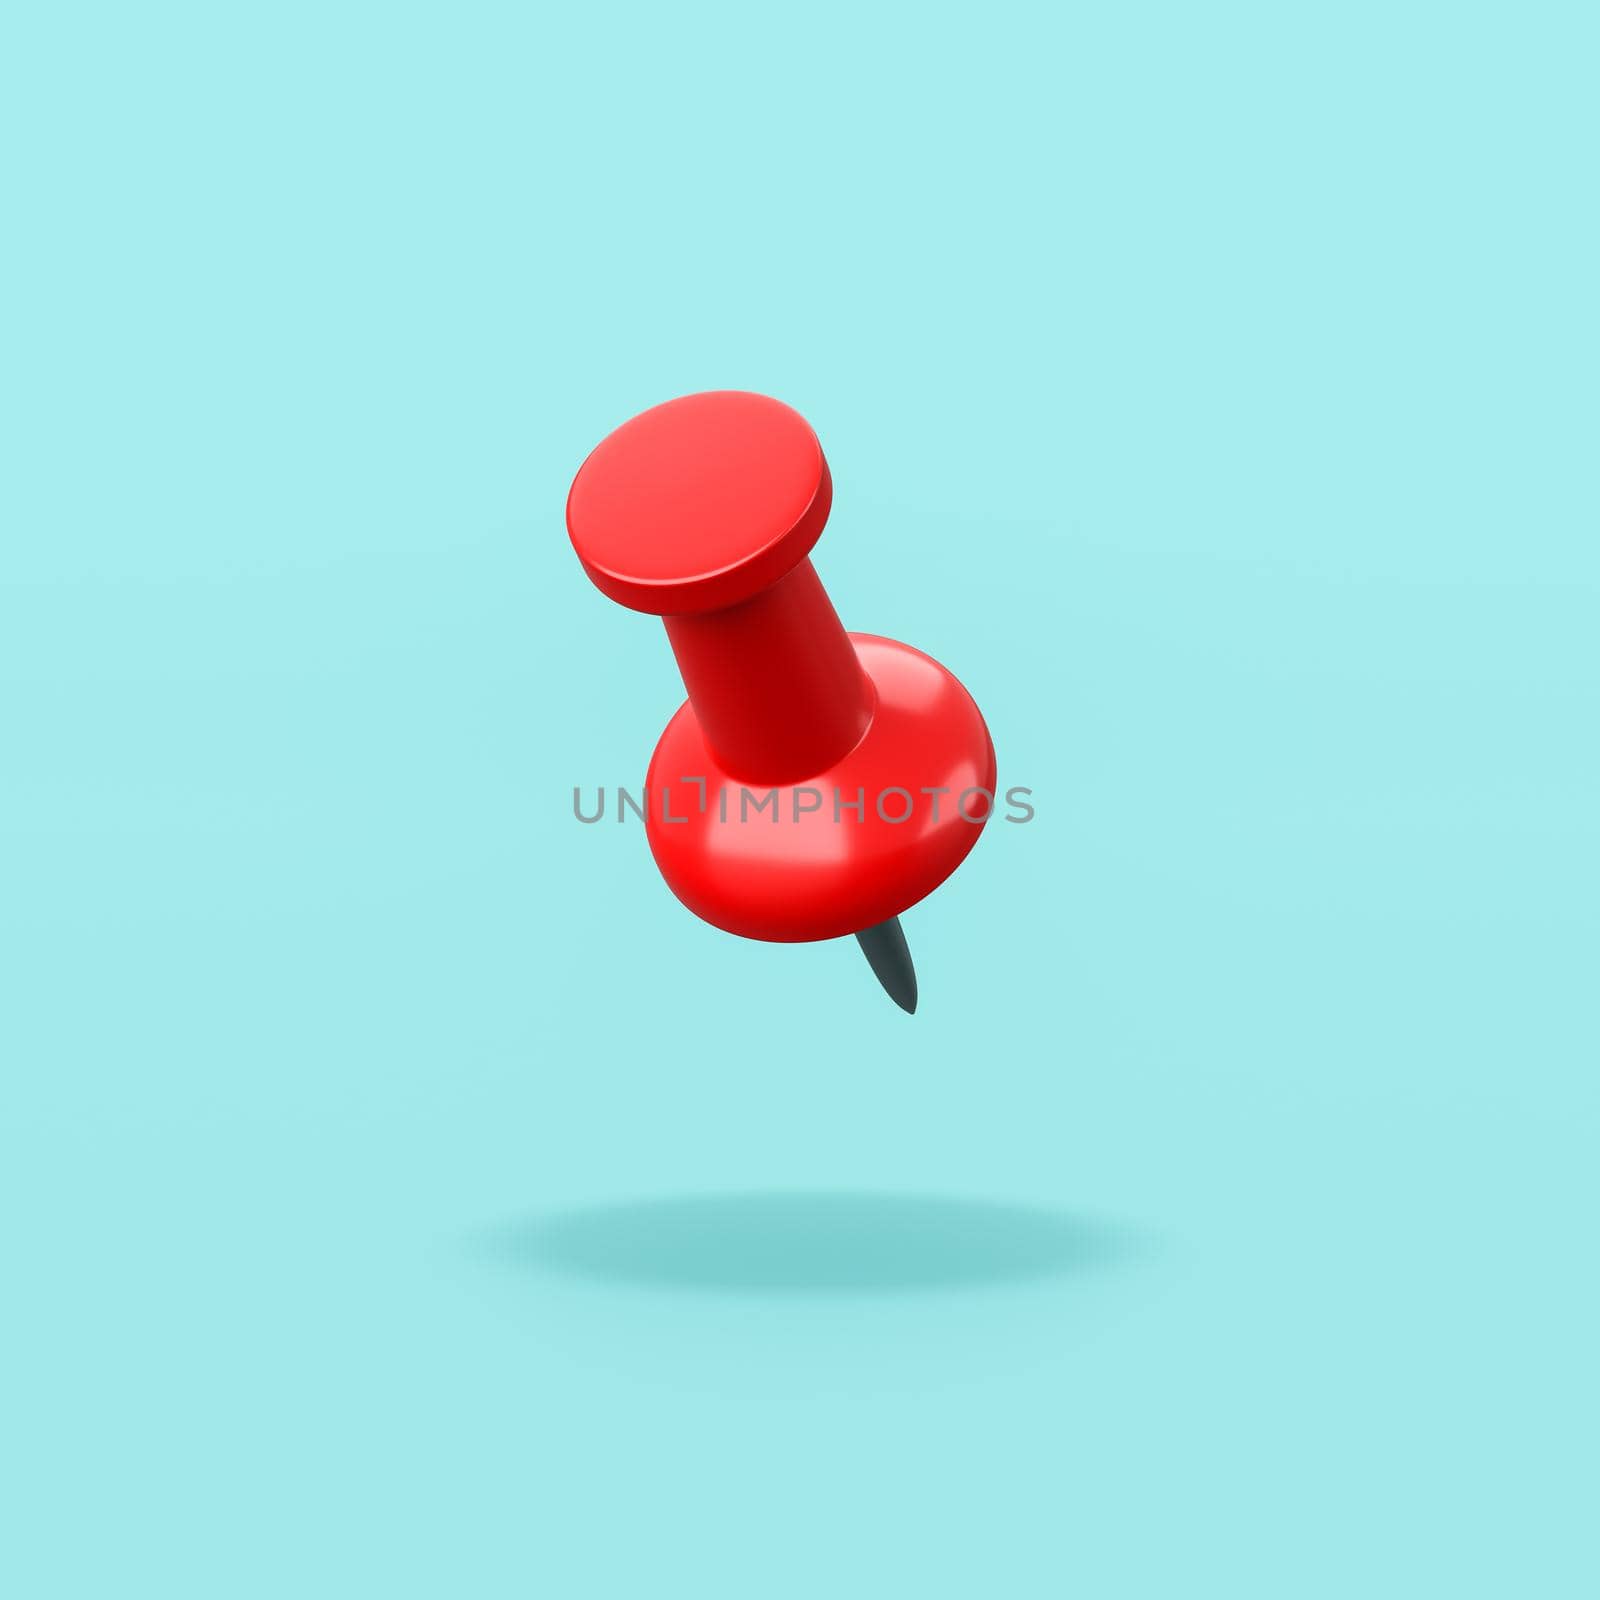 Single Red Pushpin Isolated on Flat Blue Background with Shadow 3D Illustration